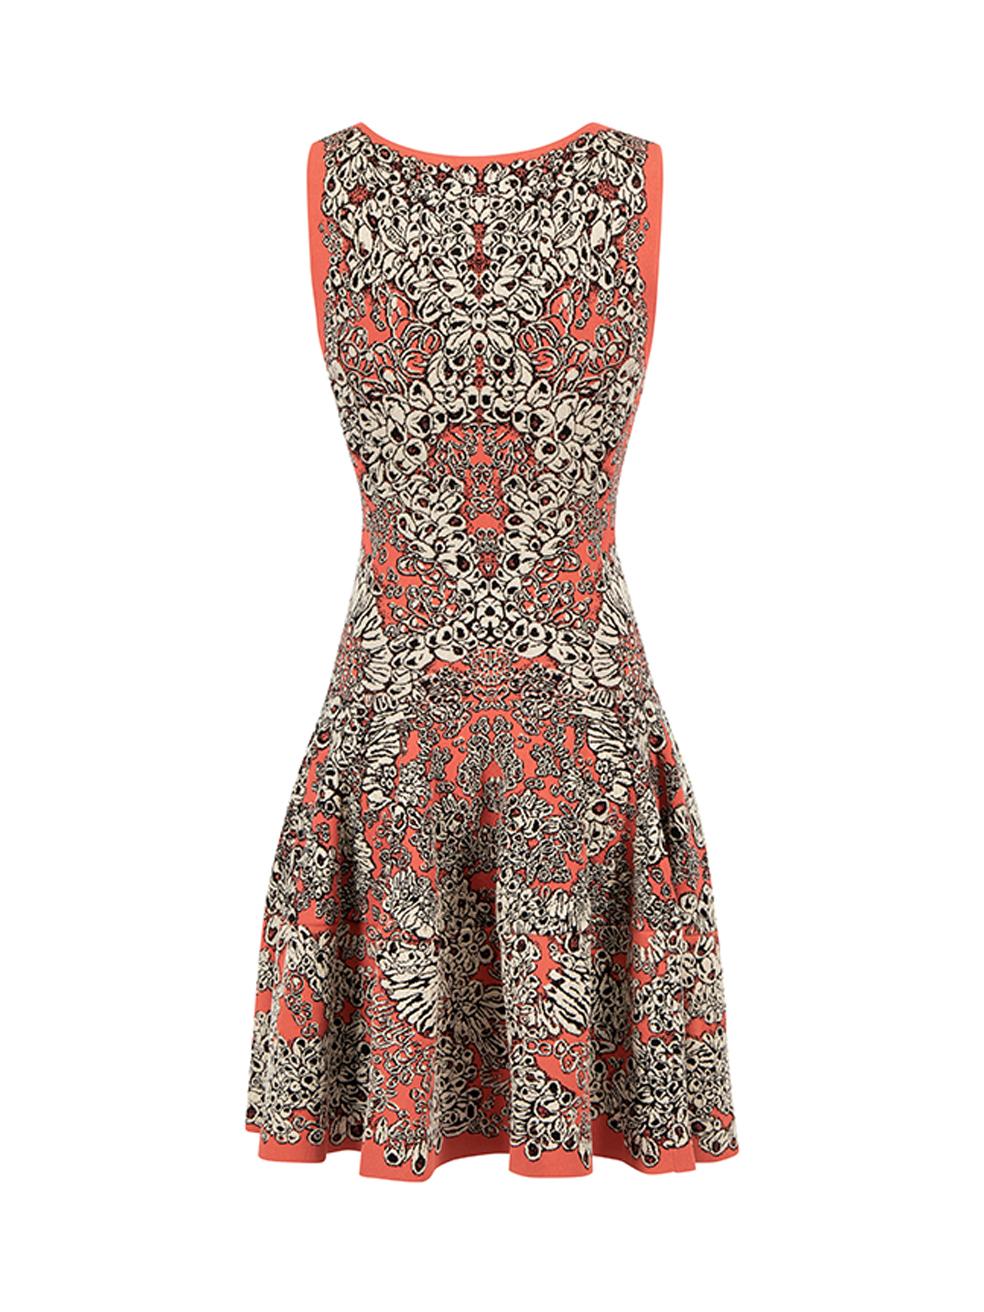 Alexander McQueen Women's Patterned Sleeveless Mini Dress In Excellent Condition For Sale In London, GB